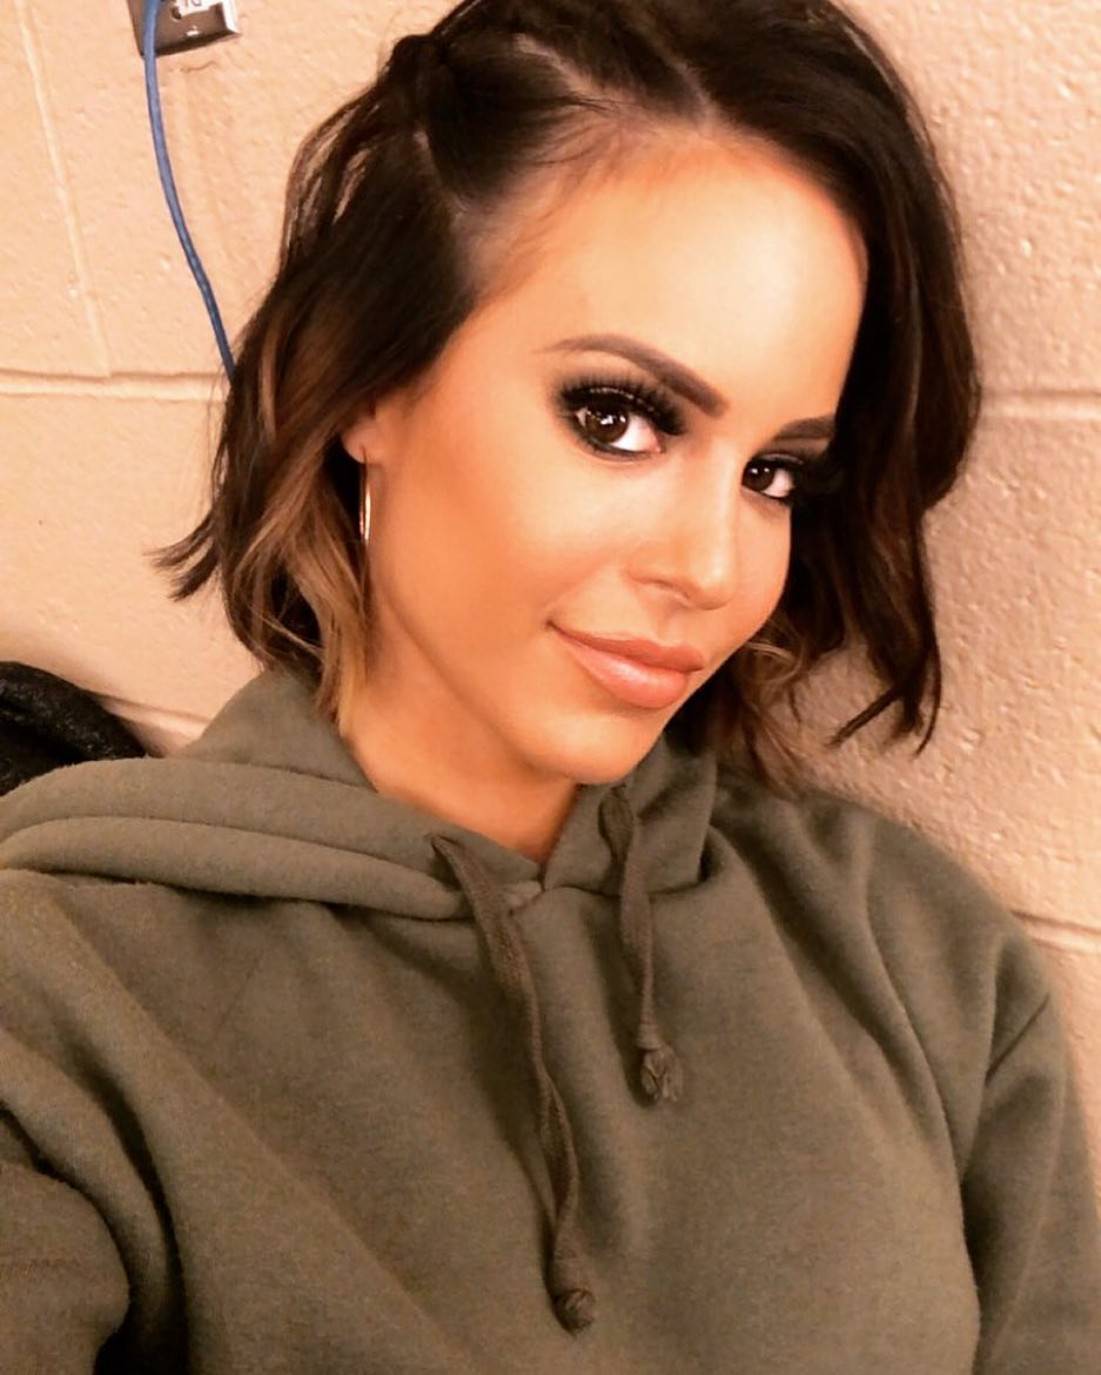  Charly Caruso